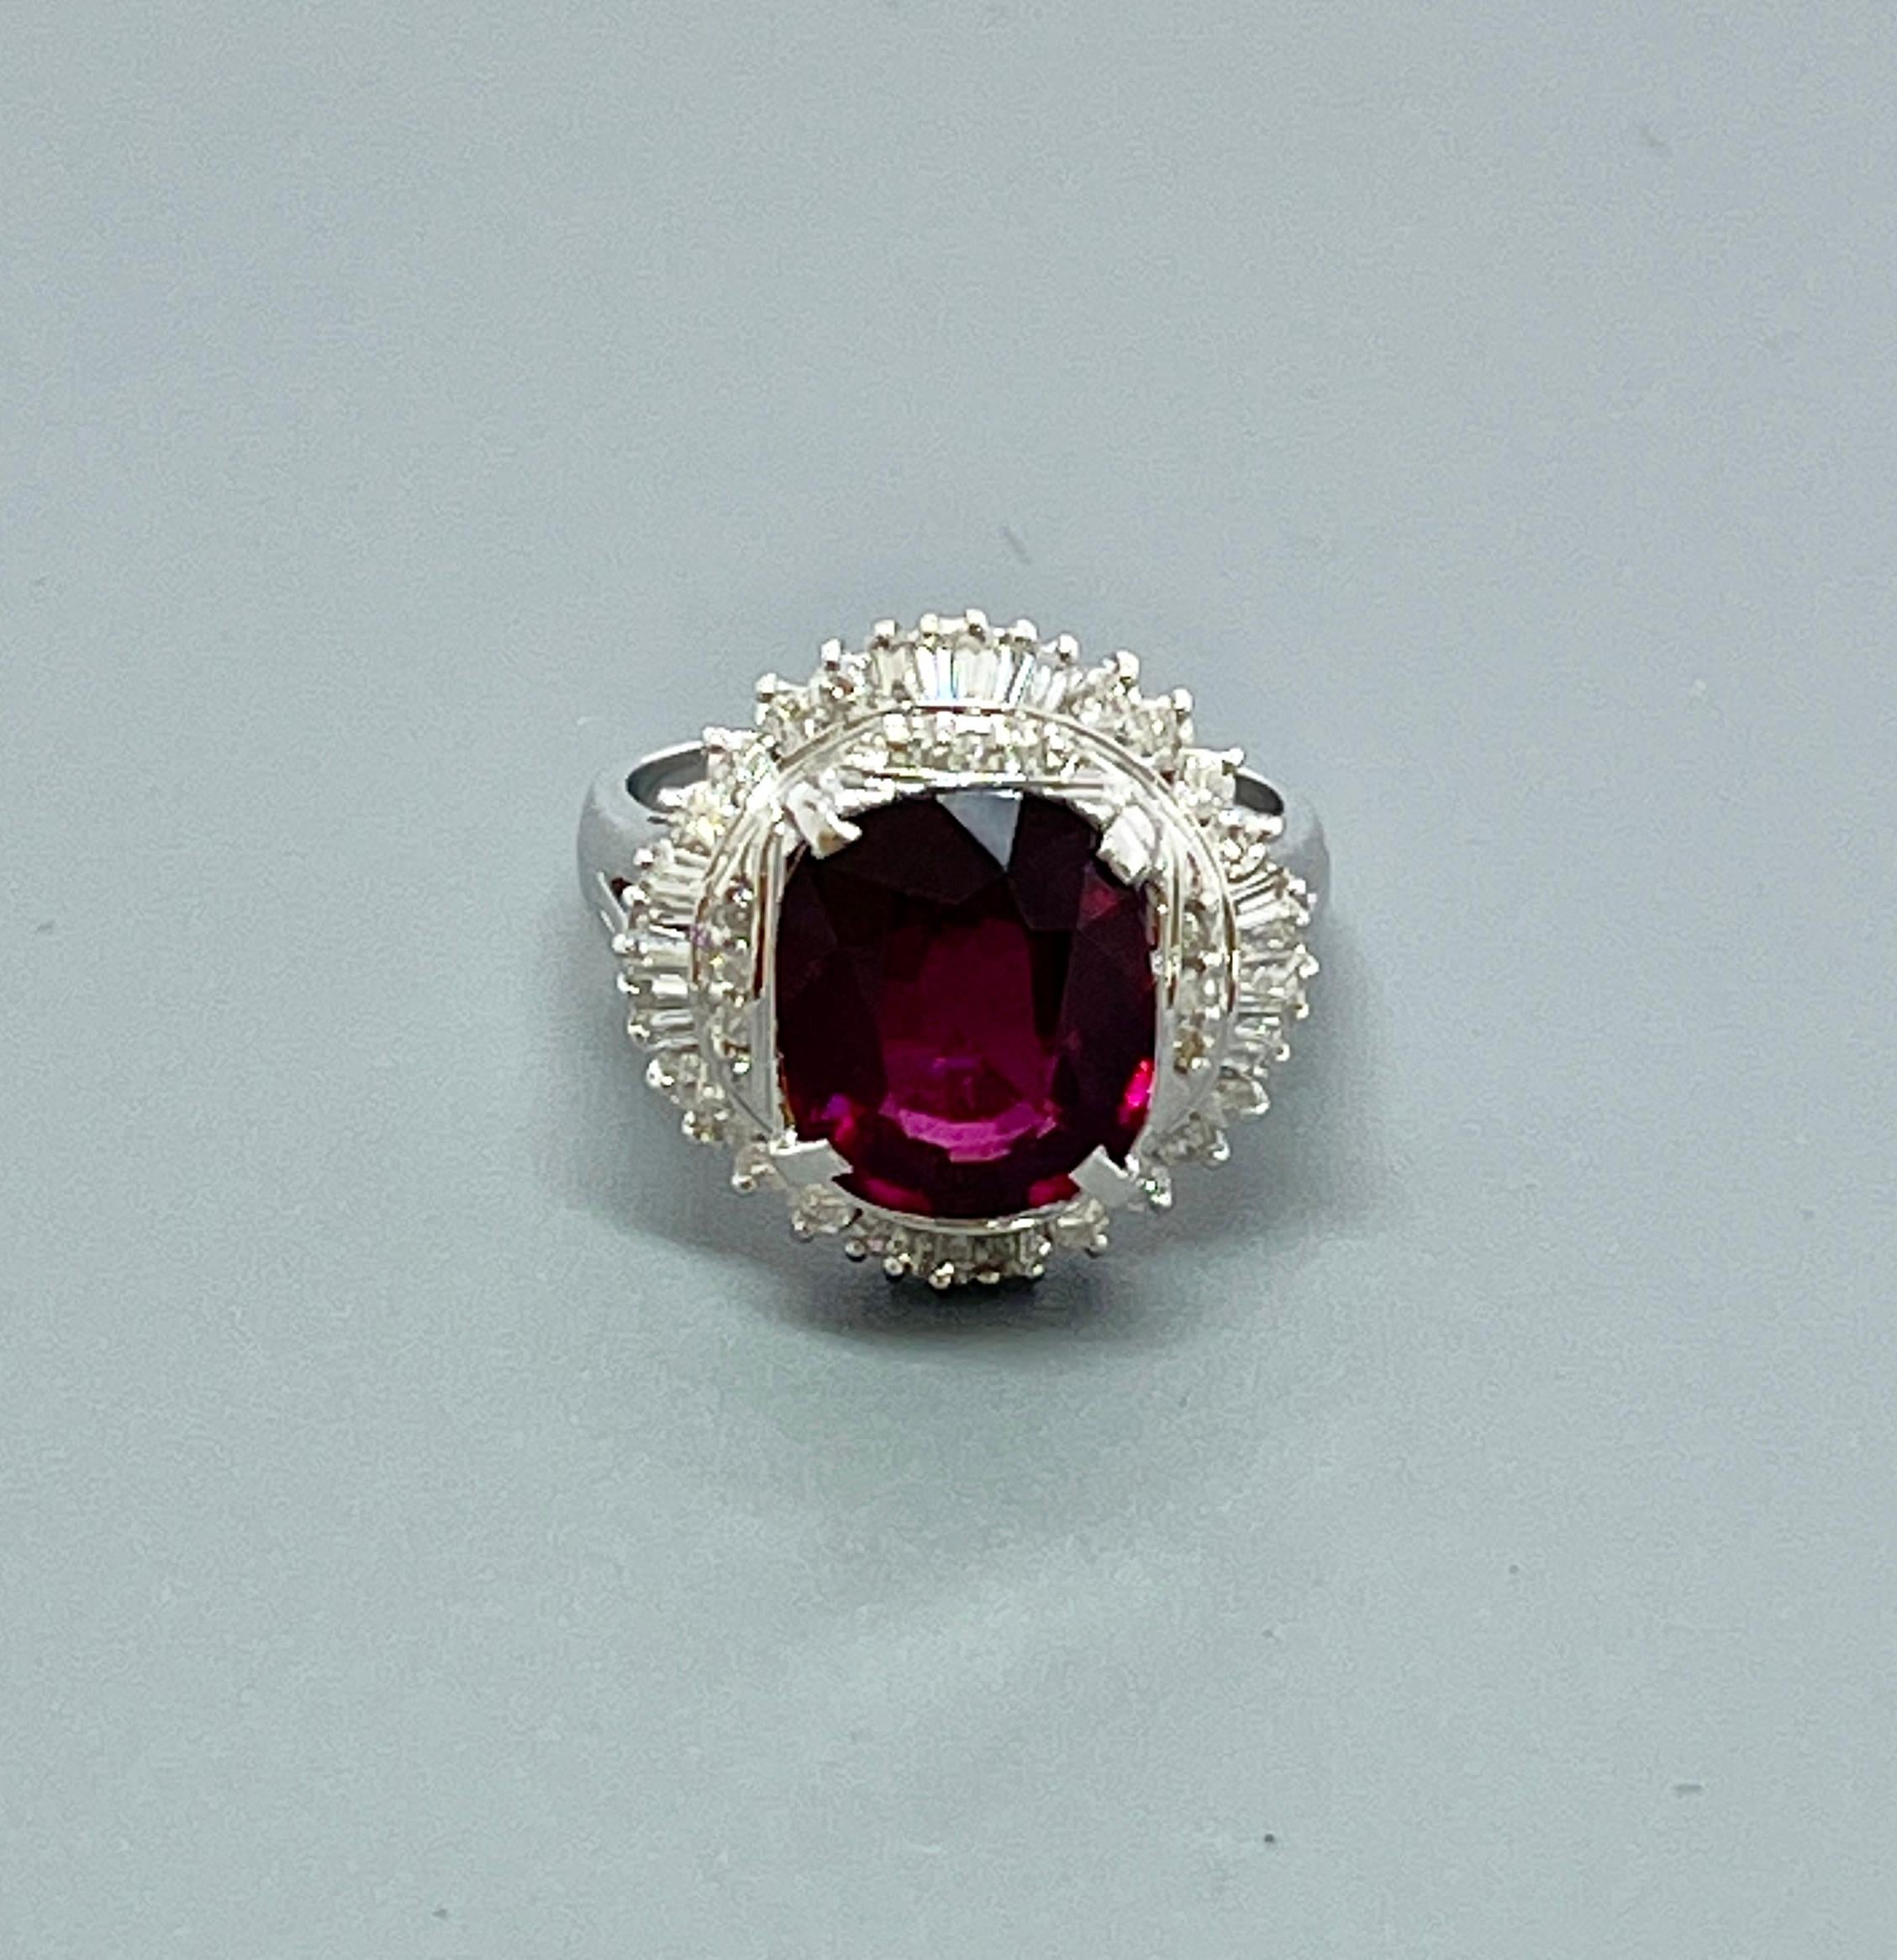 This is a gorgeous, Diamond, Garnet and Platinum Dress Ring.  It really sparkles!  

Featuring a 3 carat, Rhodolite Garnet with a deep, purple-red hue.  The Garnet is cushion cut and is surrounded by high quality, sparkly white Diamonds.  
The